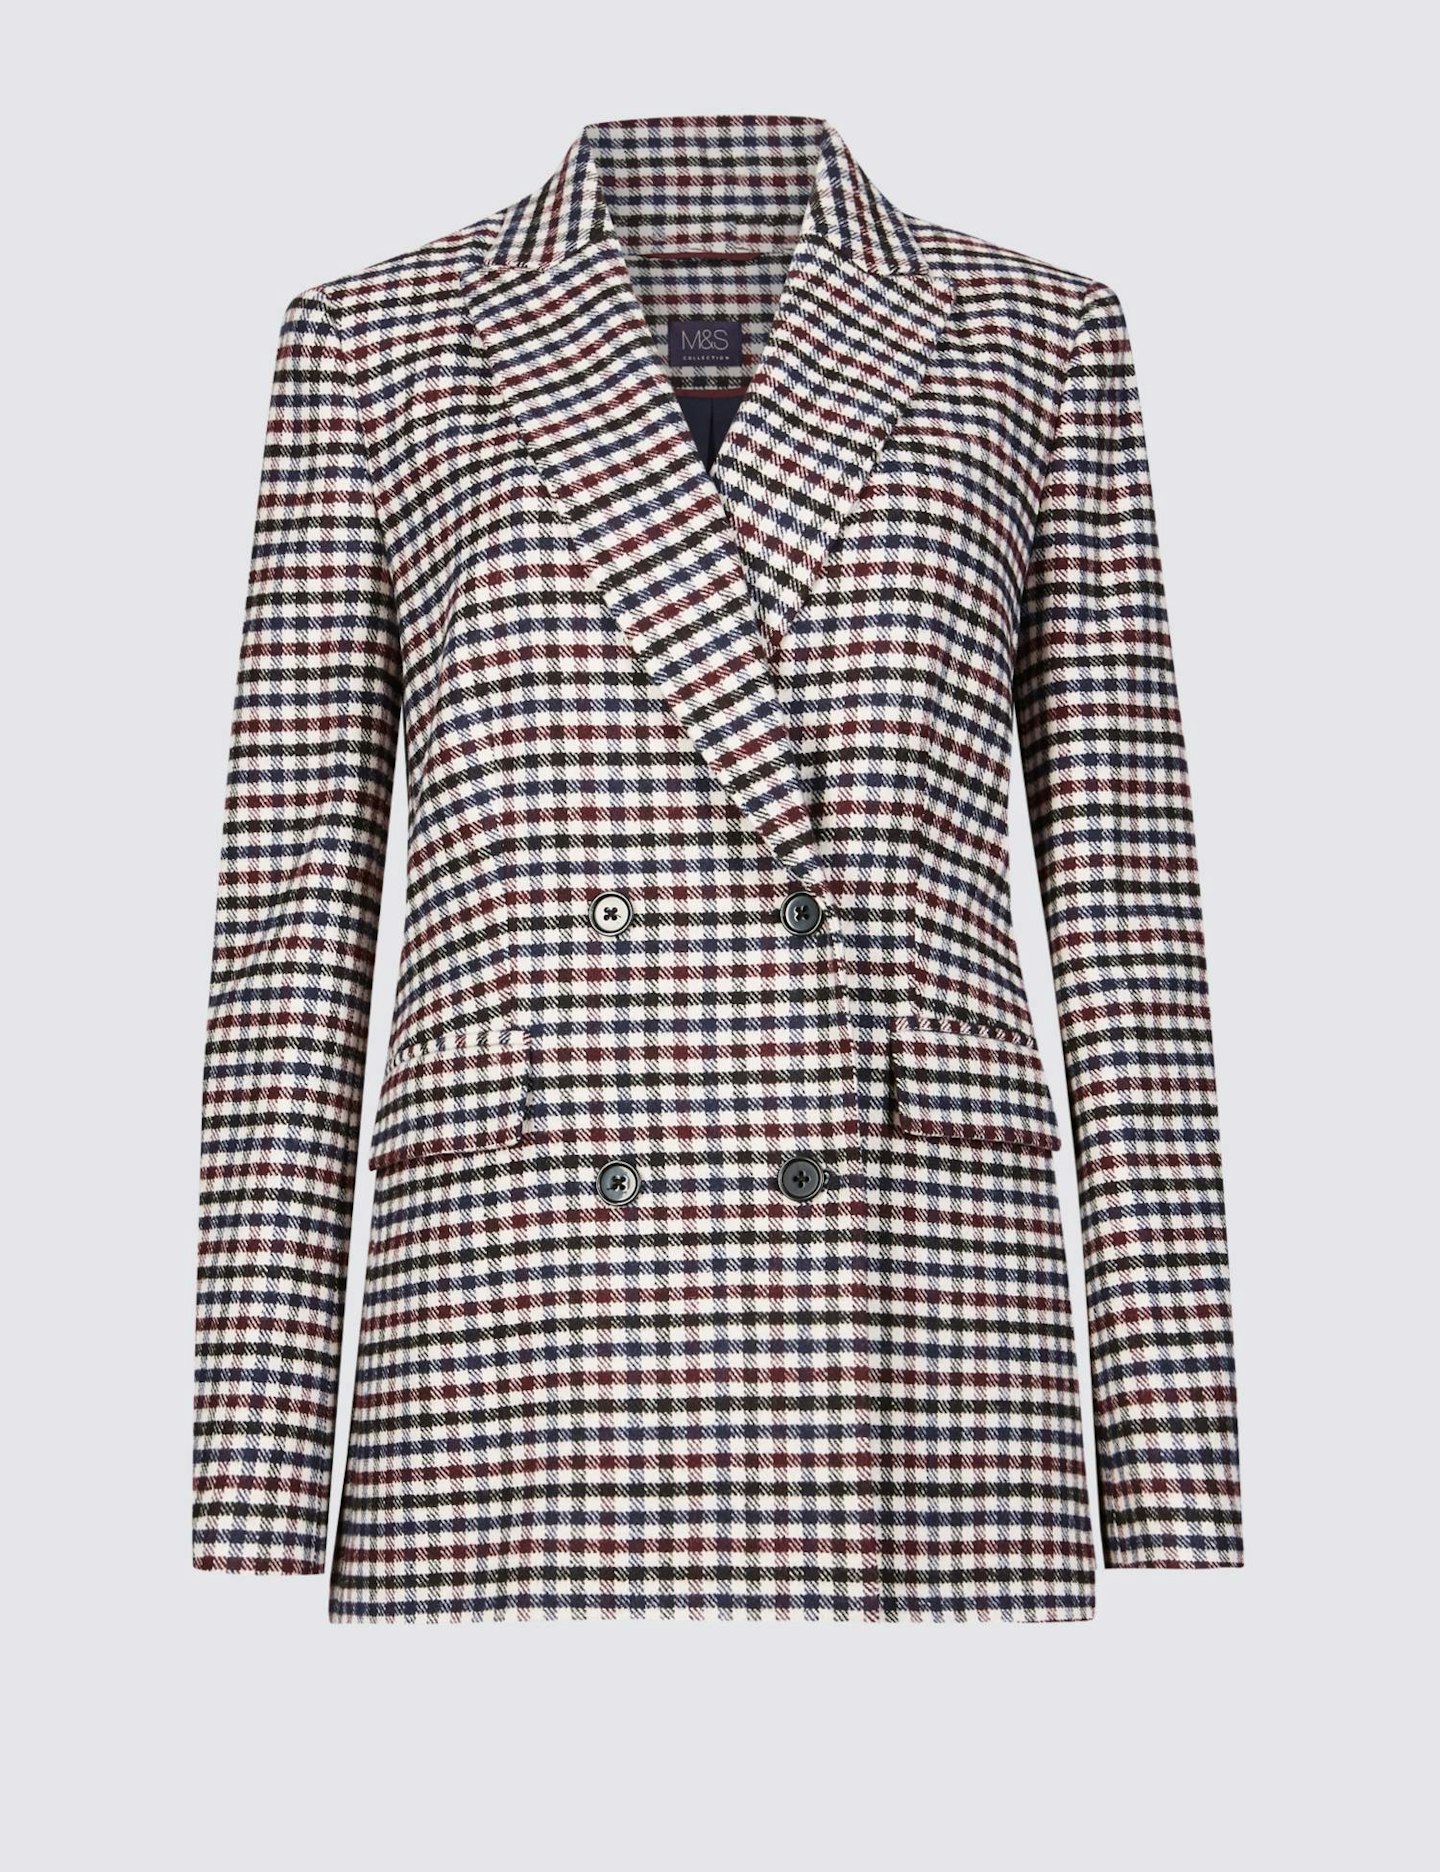 M&S Collection, Gingham Double Breasted Blazer, £79